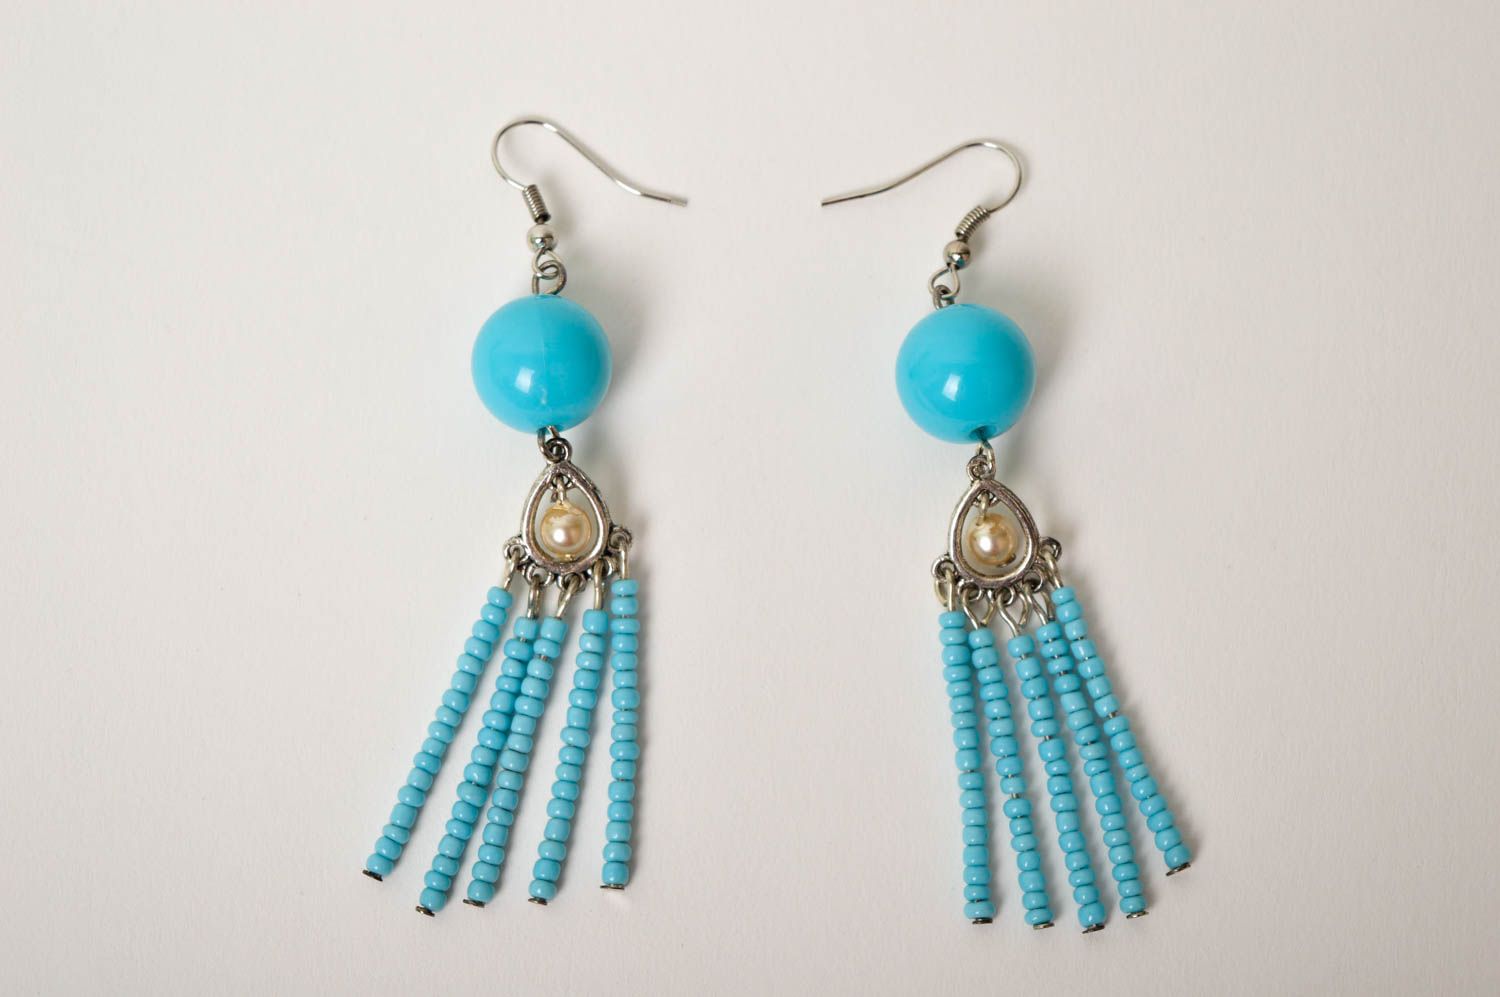 Handmade earrings long earrings with charms designer jewelry gift ideas photo 4